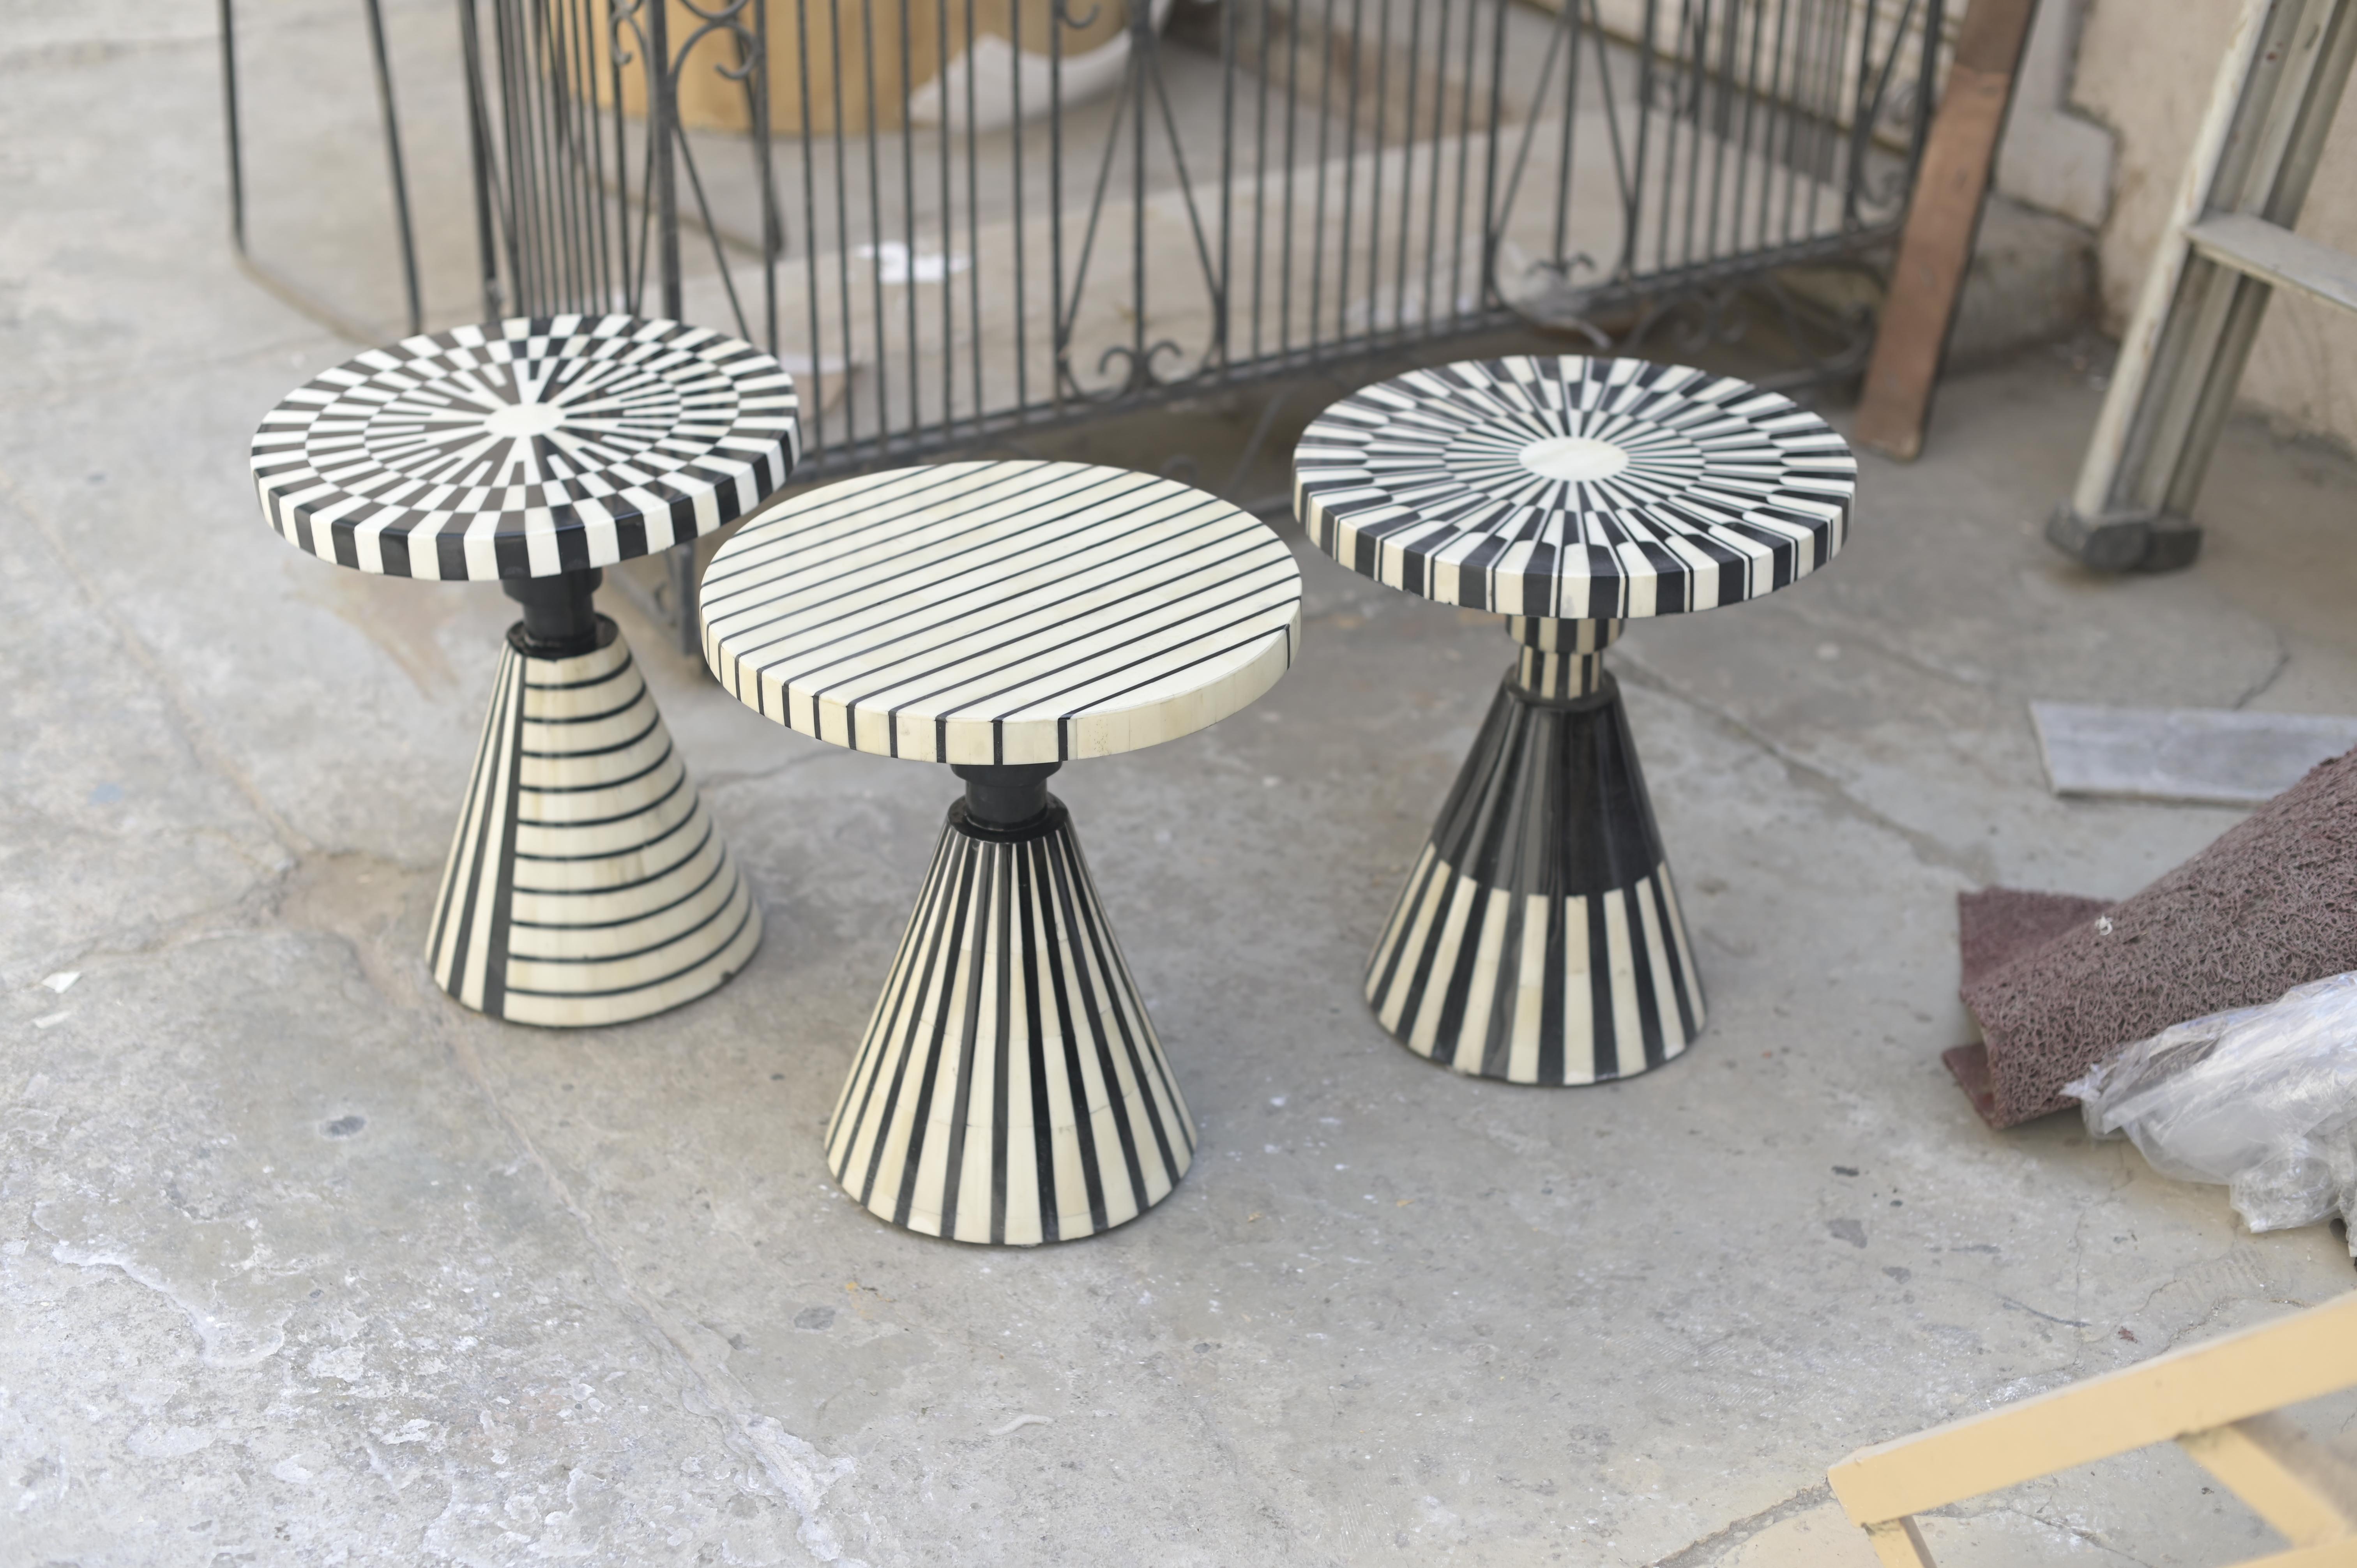 Indian Monochrome Black and White Dining Table with Matching Stools, 4 Piece Set For Sale